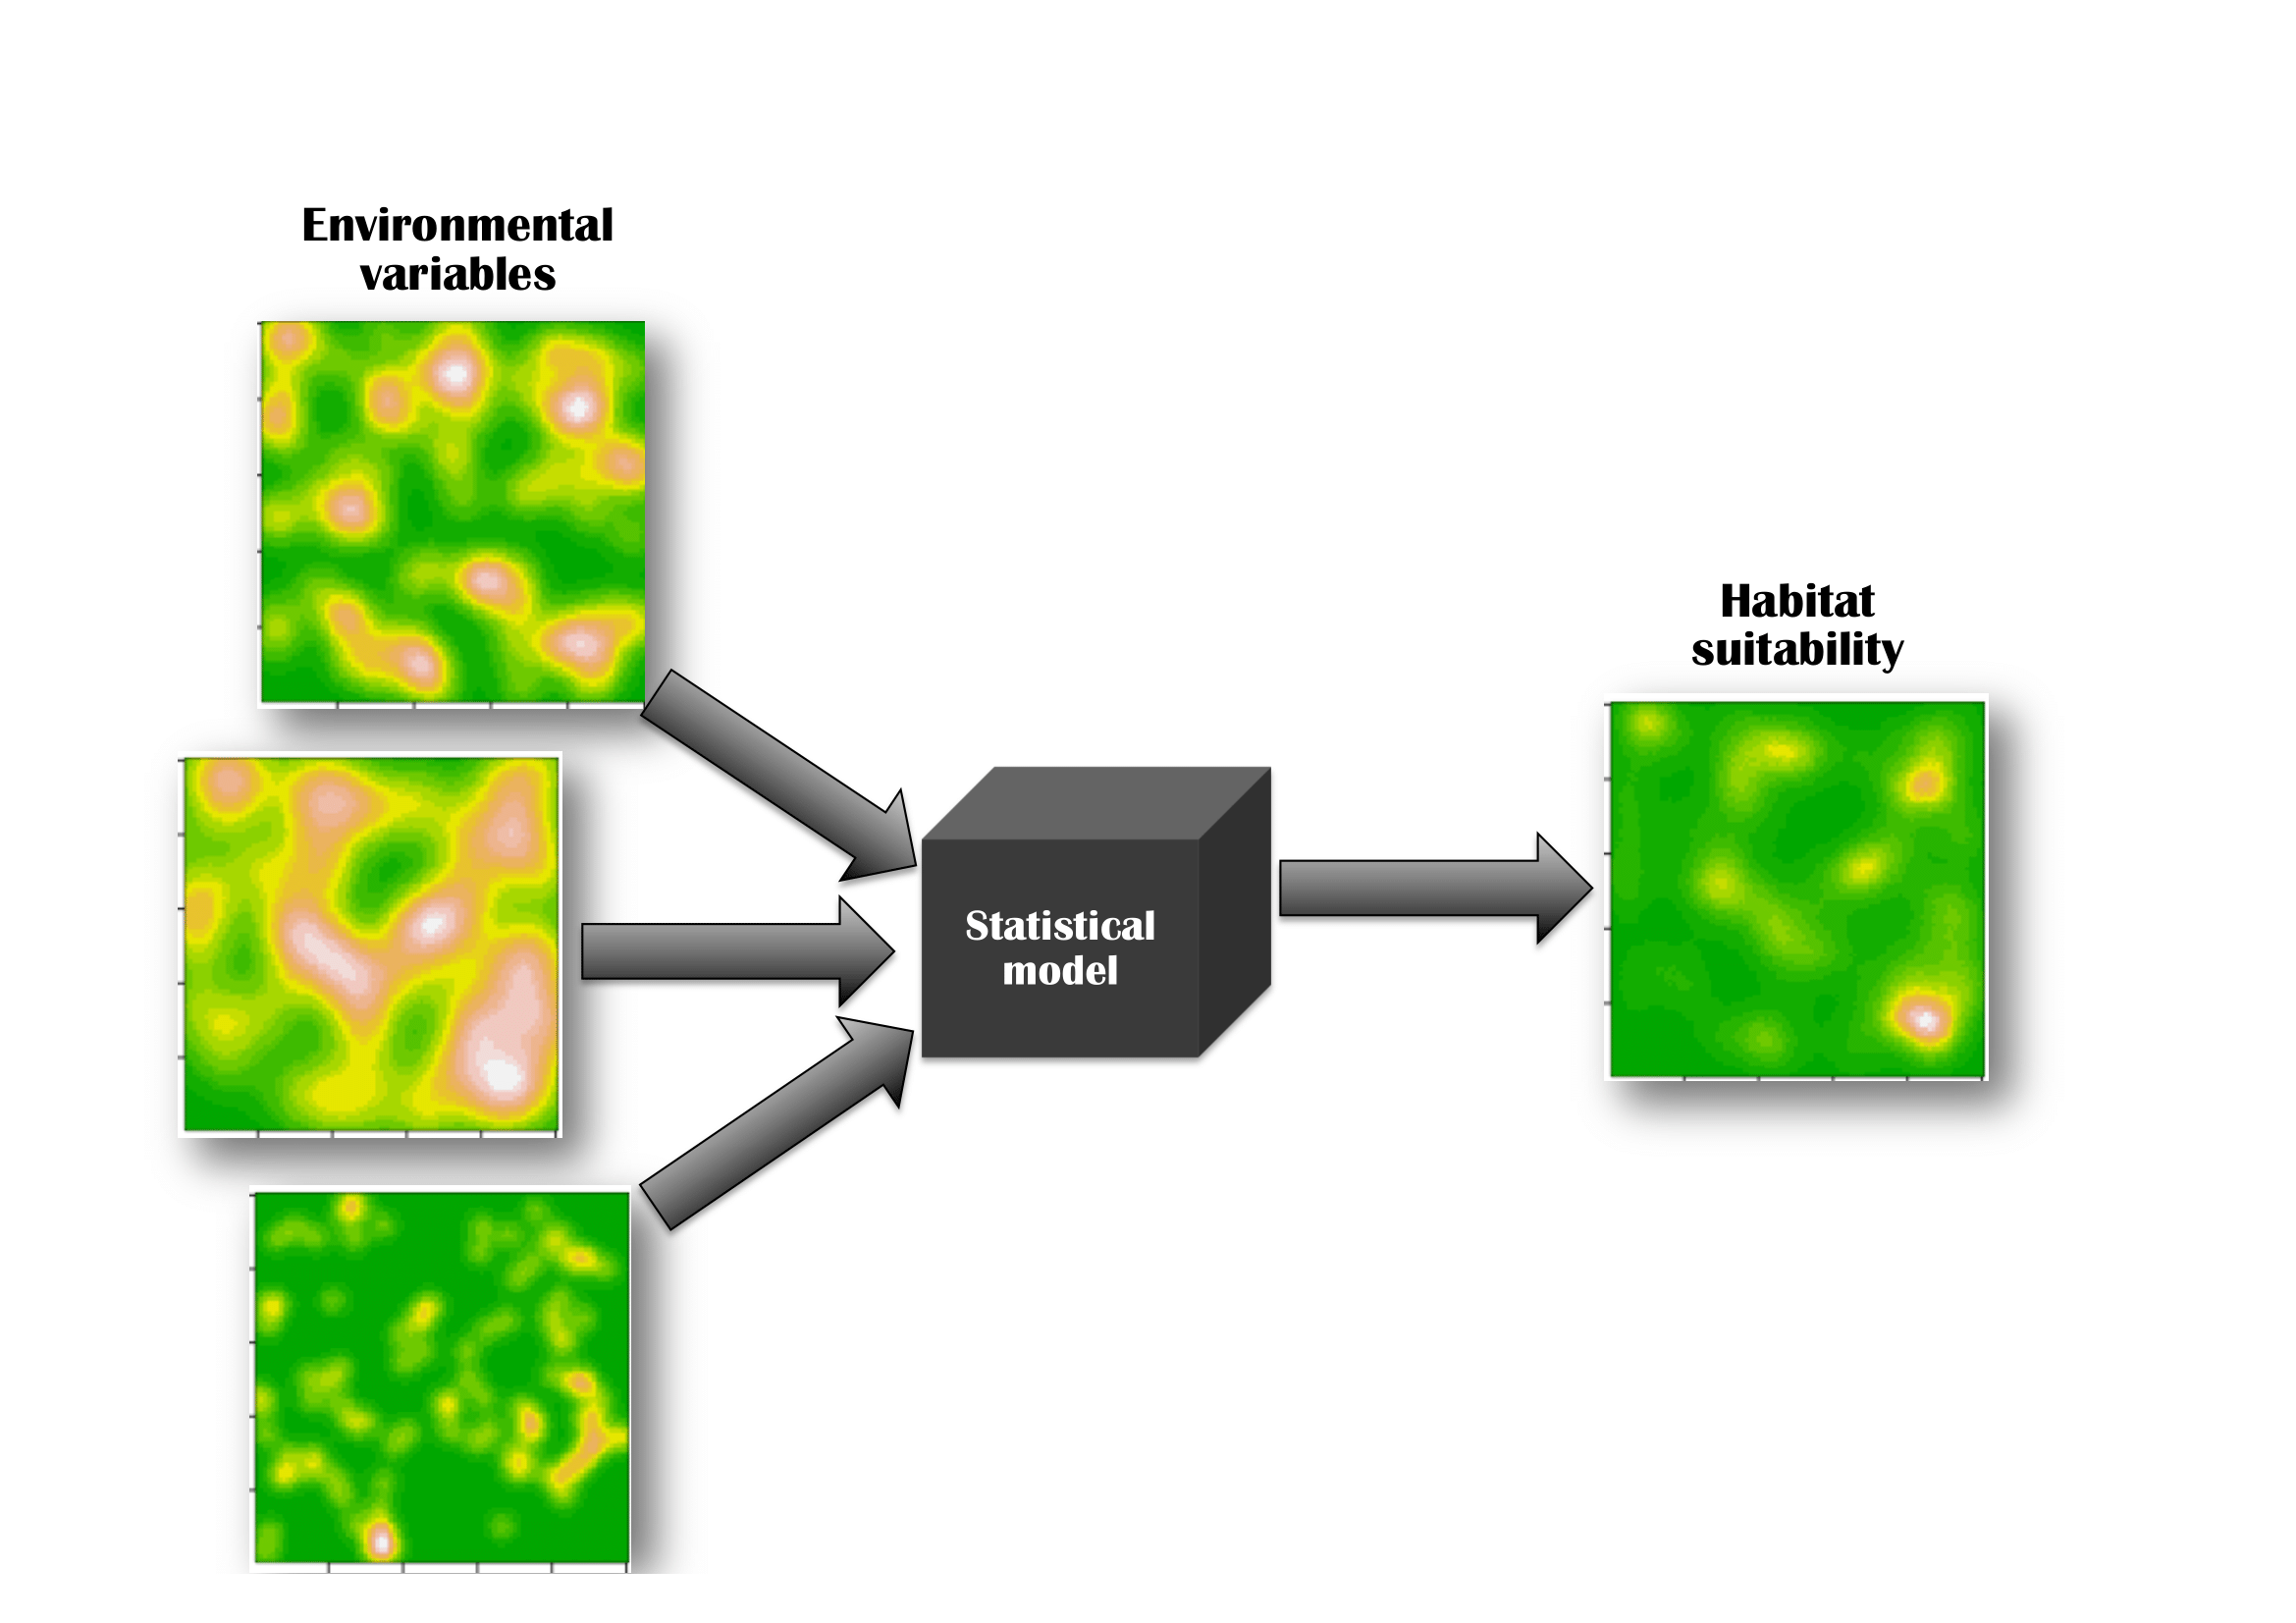 Species-habitat association models are usually imagined in geographical space as a superposition (a combination) of environmental layers, into some measure of habitat suitability, via a statistical model. The statistical model is often treated as a black box, and the emphasis is placed on the relative contribution of the input layers to the resulting map.